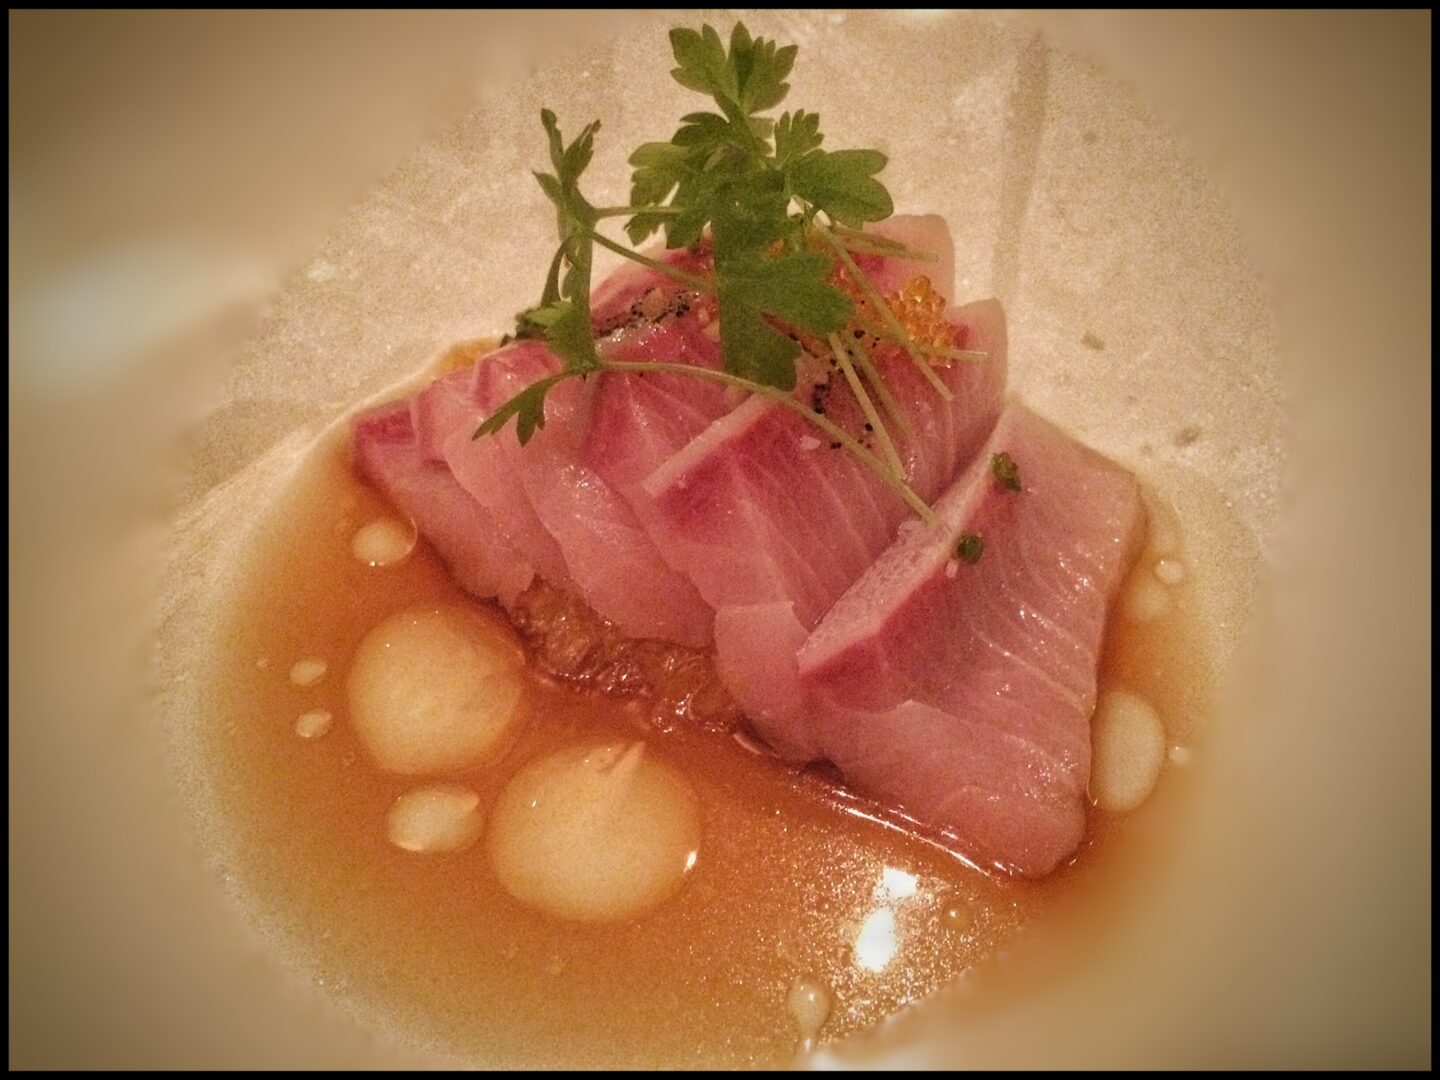 A piece of tuna is sitting on top of a plate.